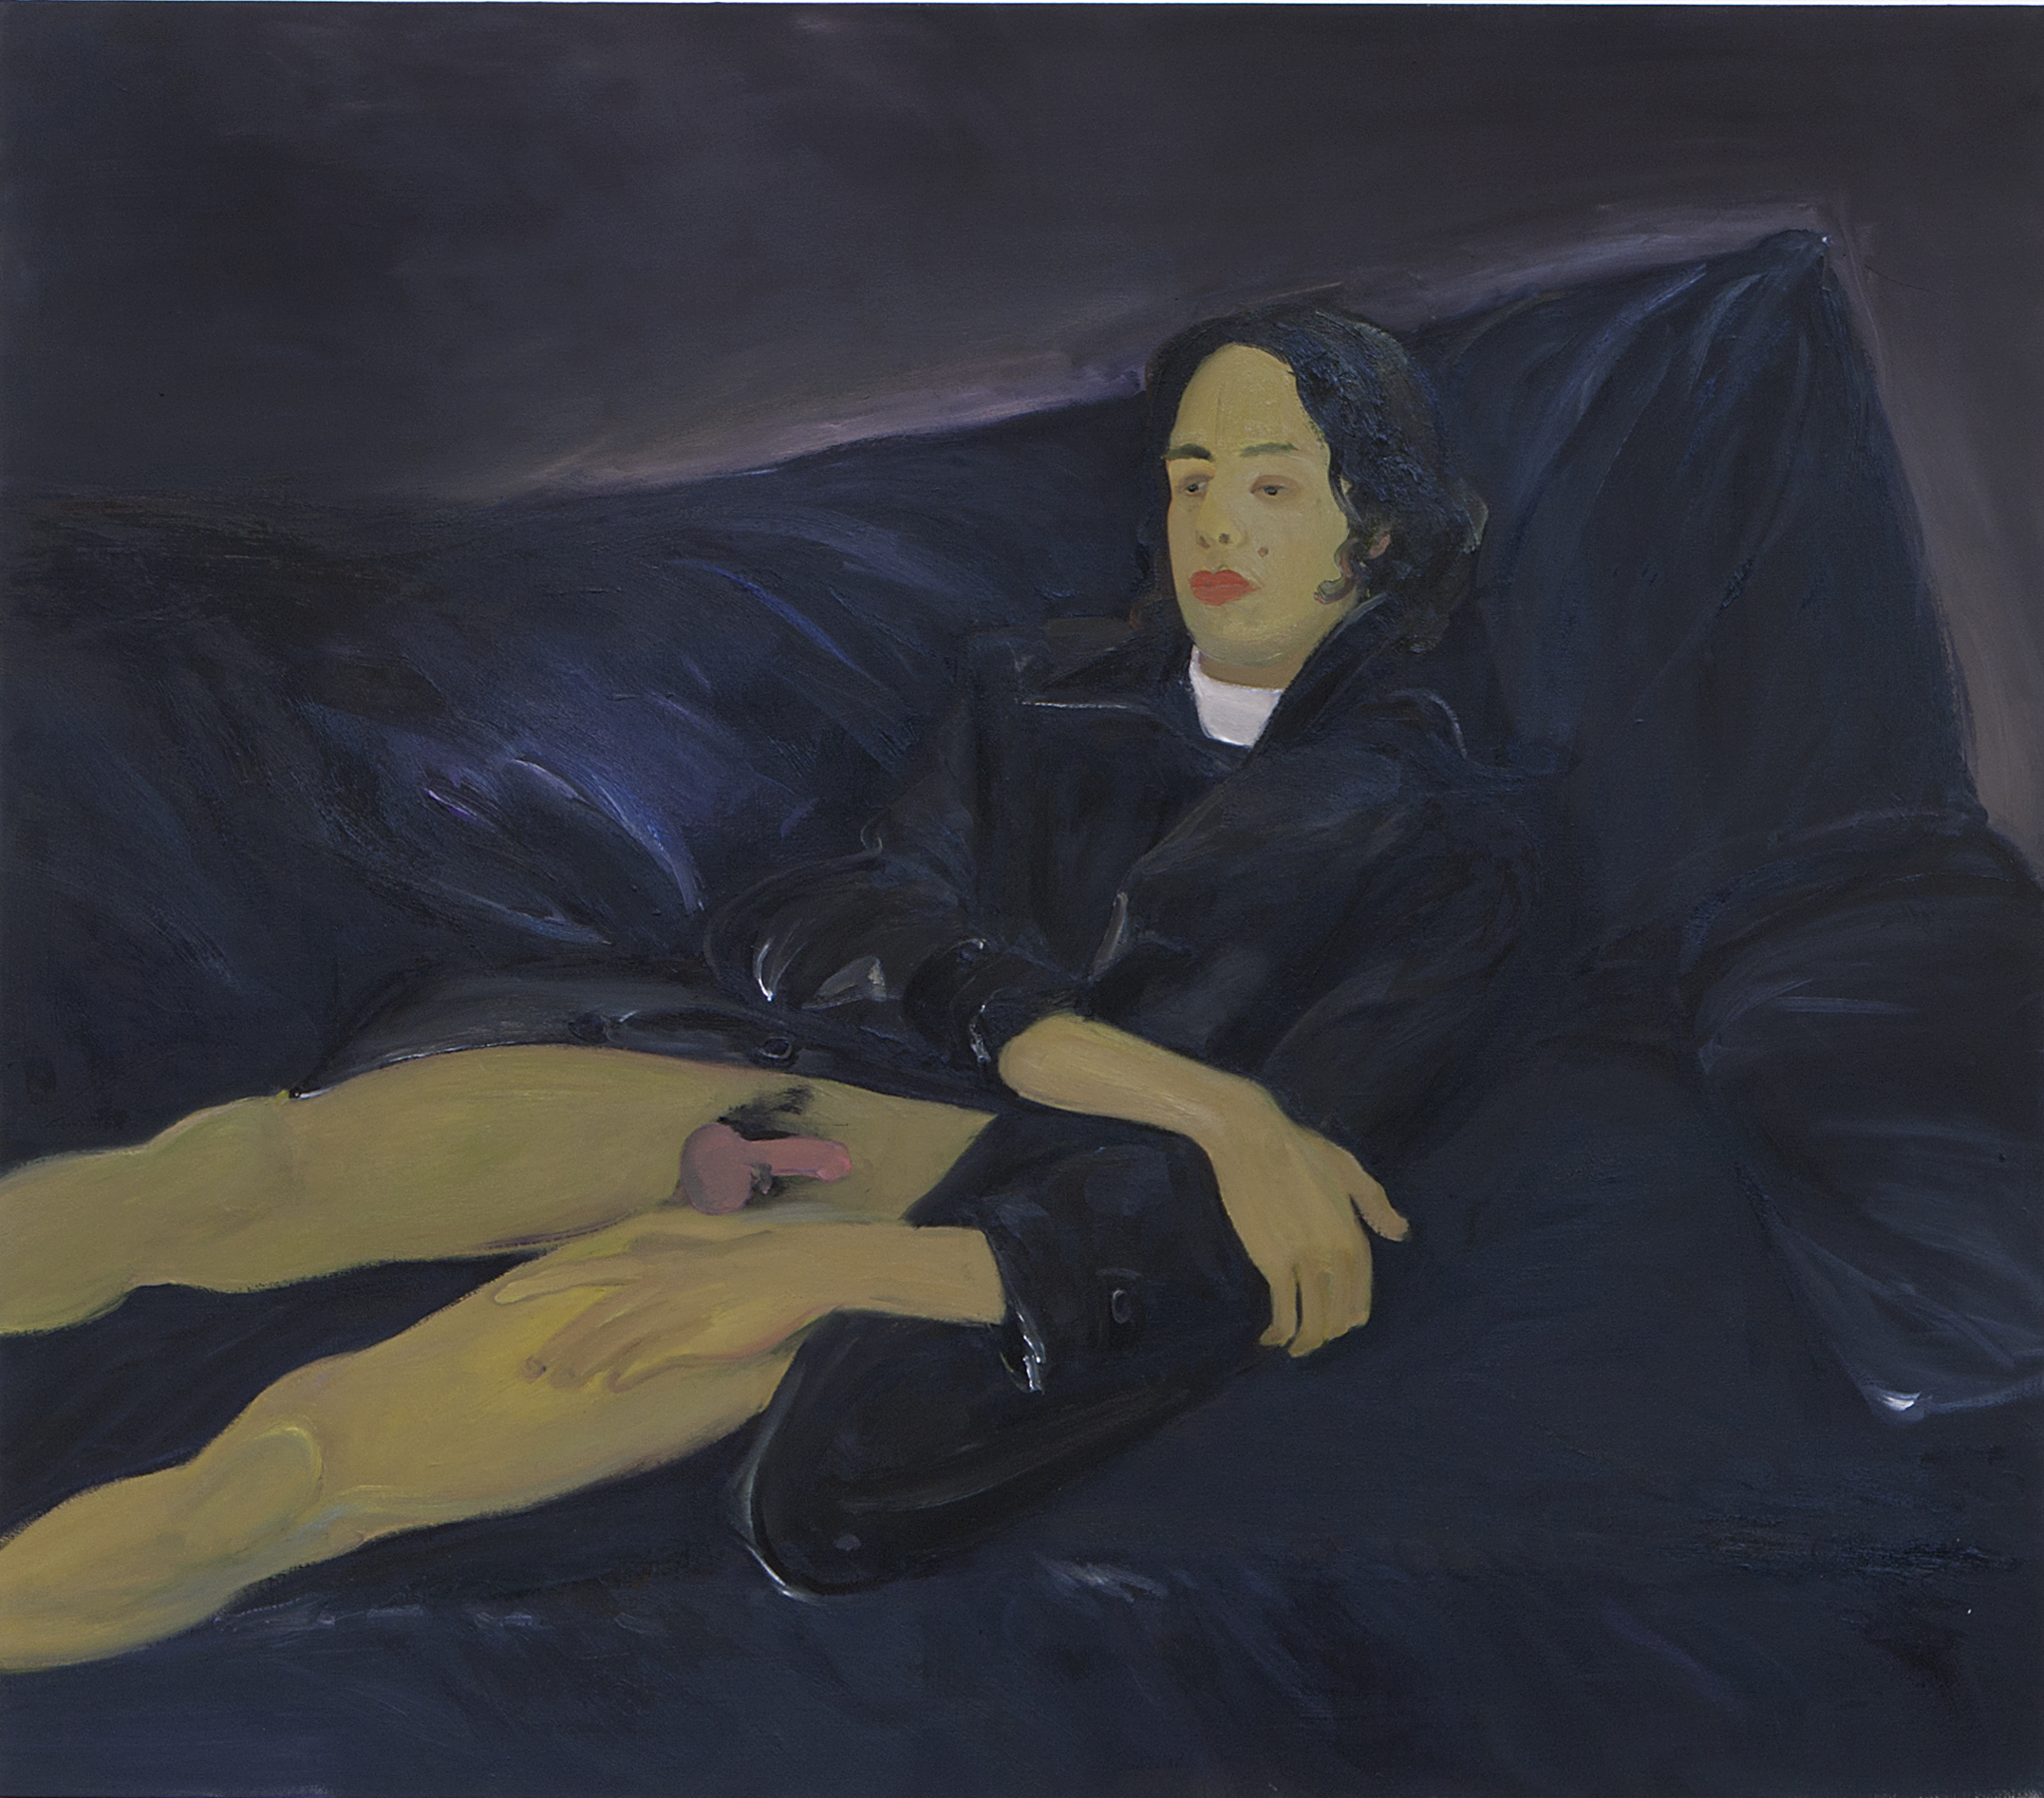 A man on a sofa without pants, wearing a leather jacket by Xinyi Cheng